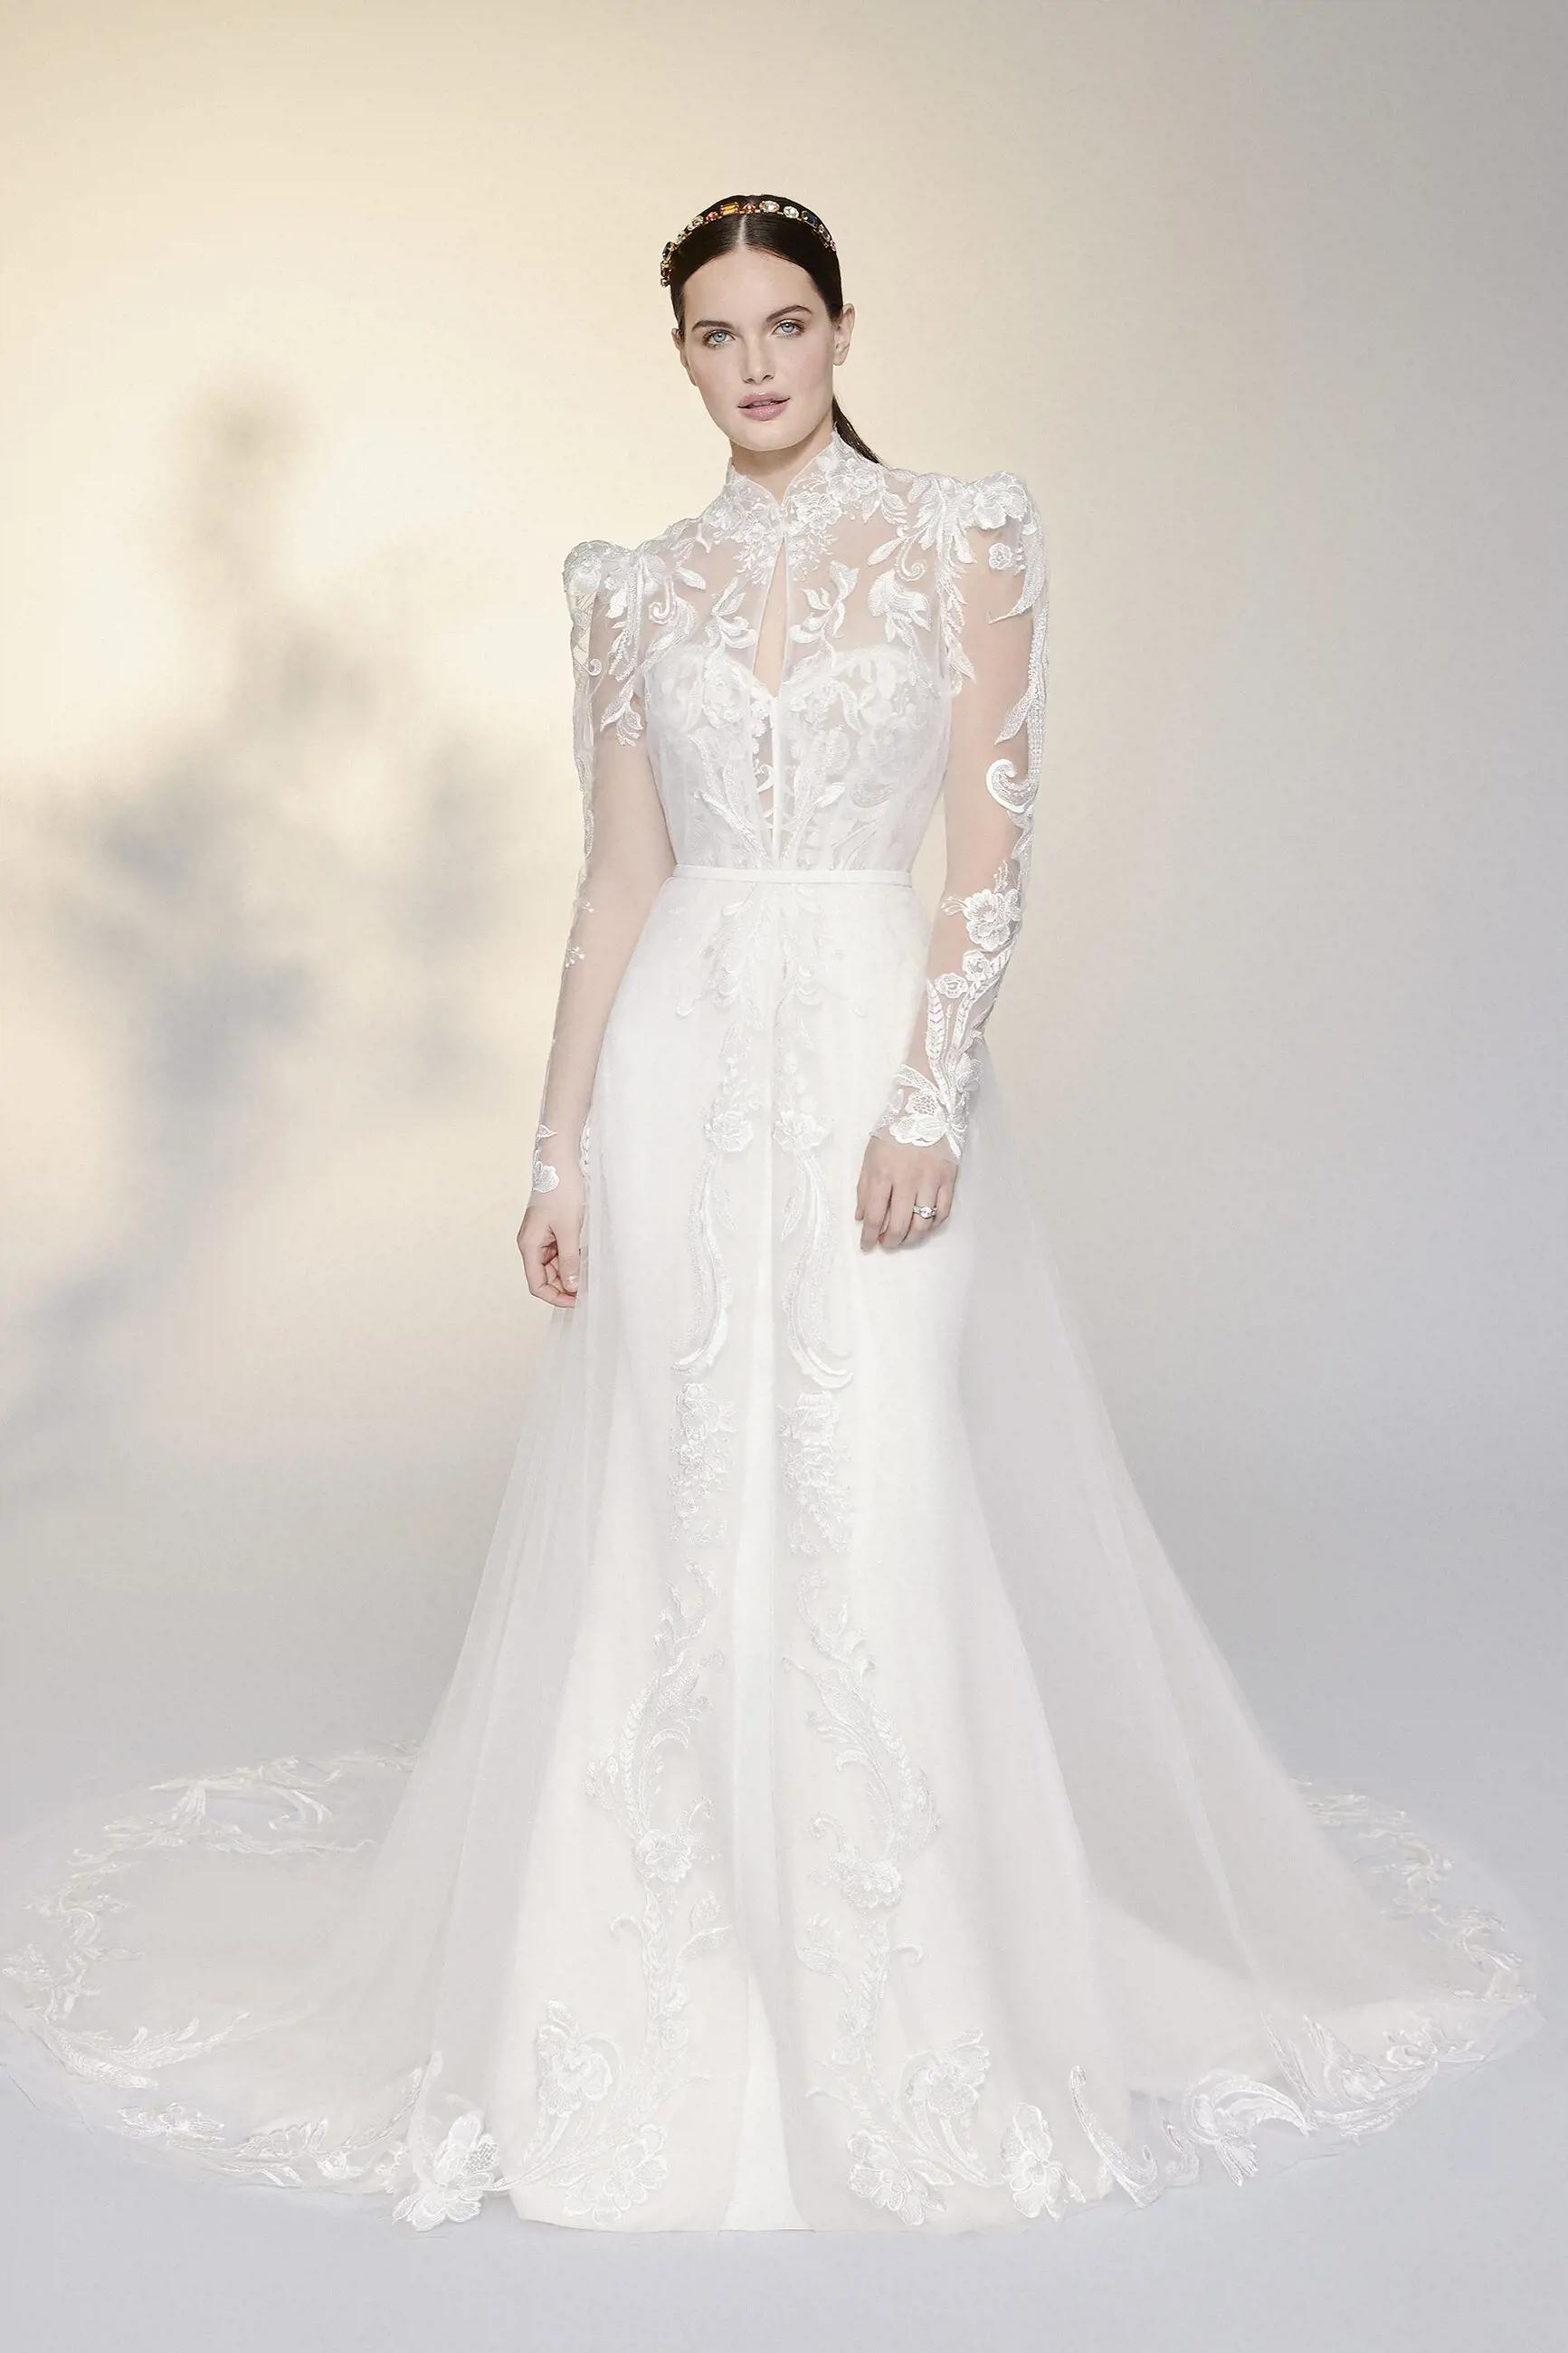 Wedding Gowns That Will Make You Feel Like a Princess! Image